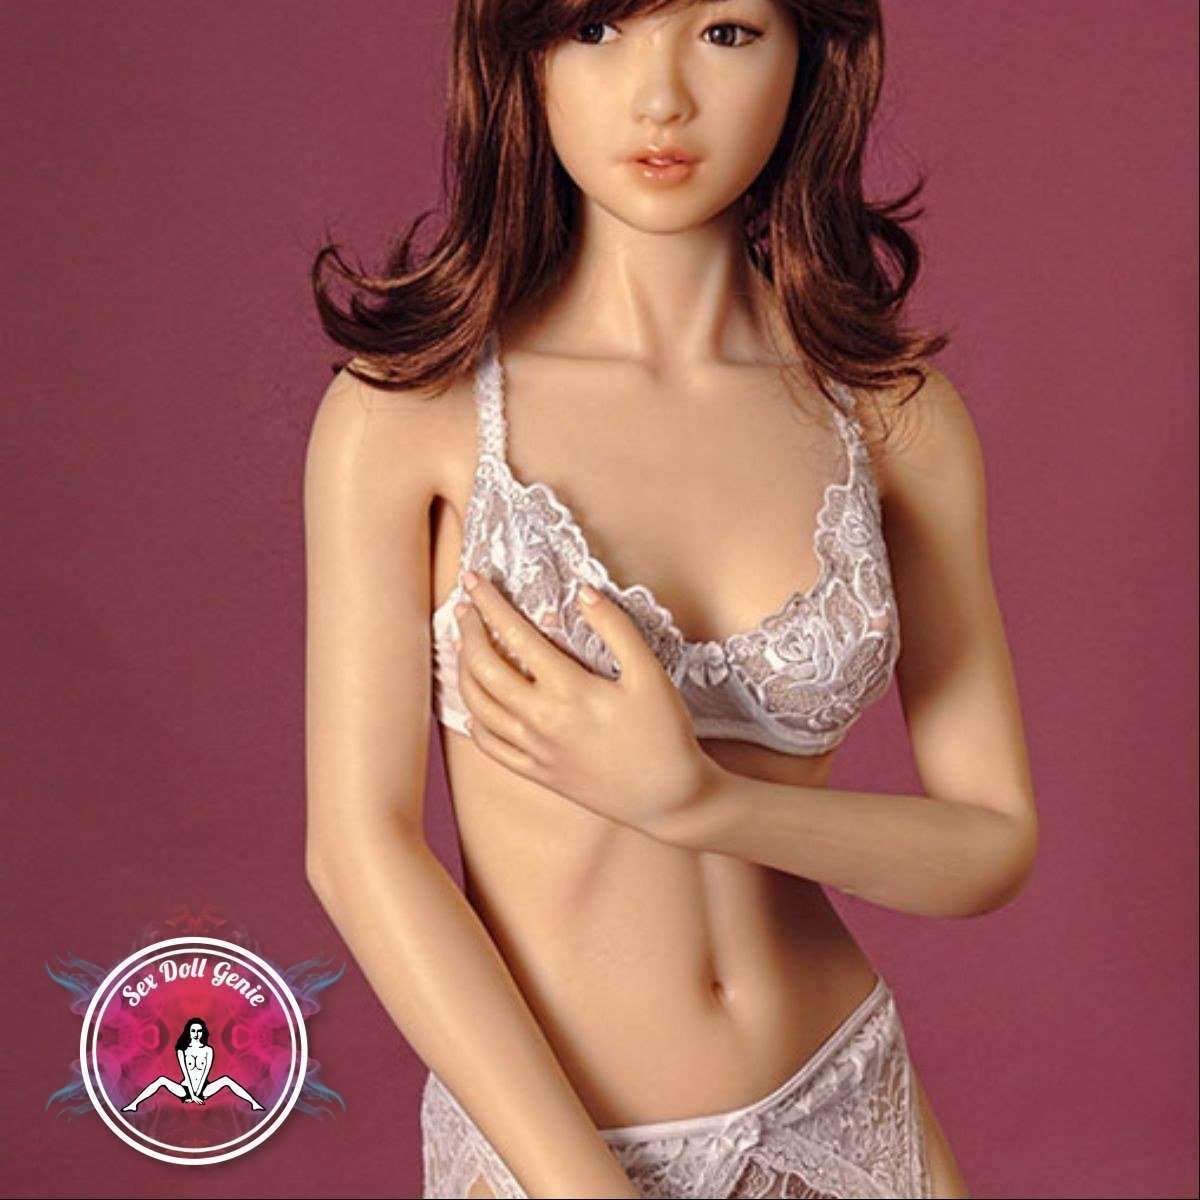 DS Doll - 163 - Jiayi Head - Type 2 D Cup Silicone Doll-9